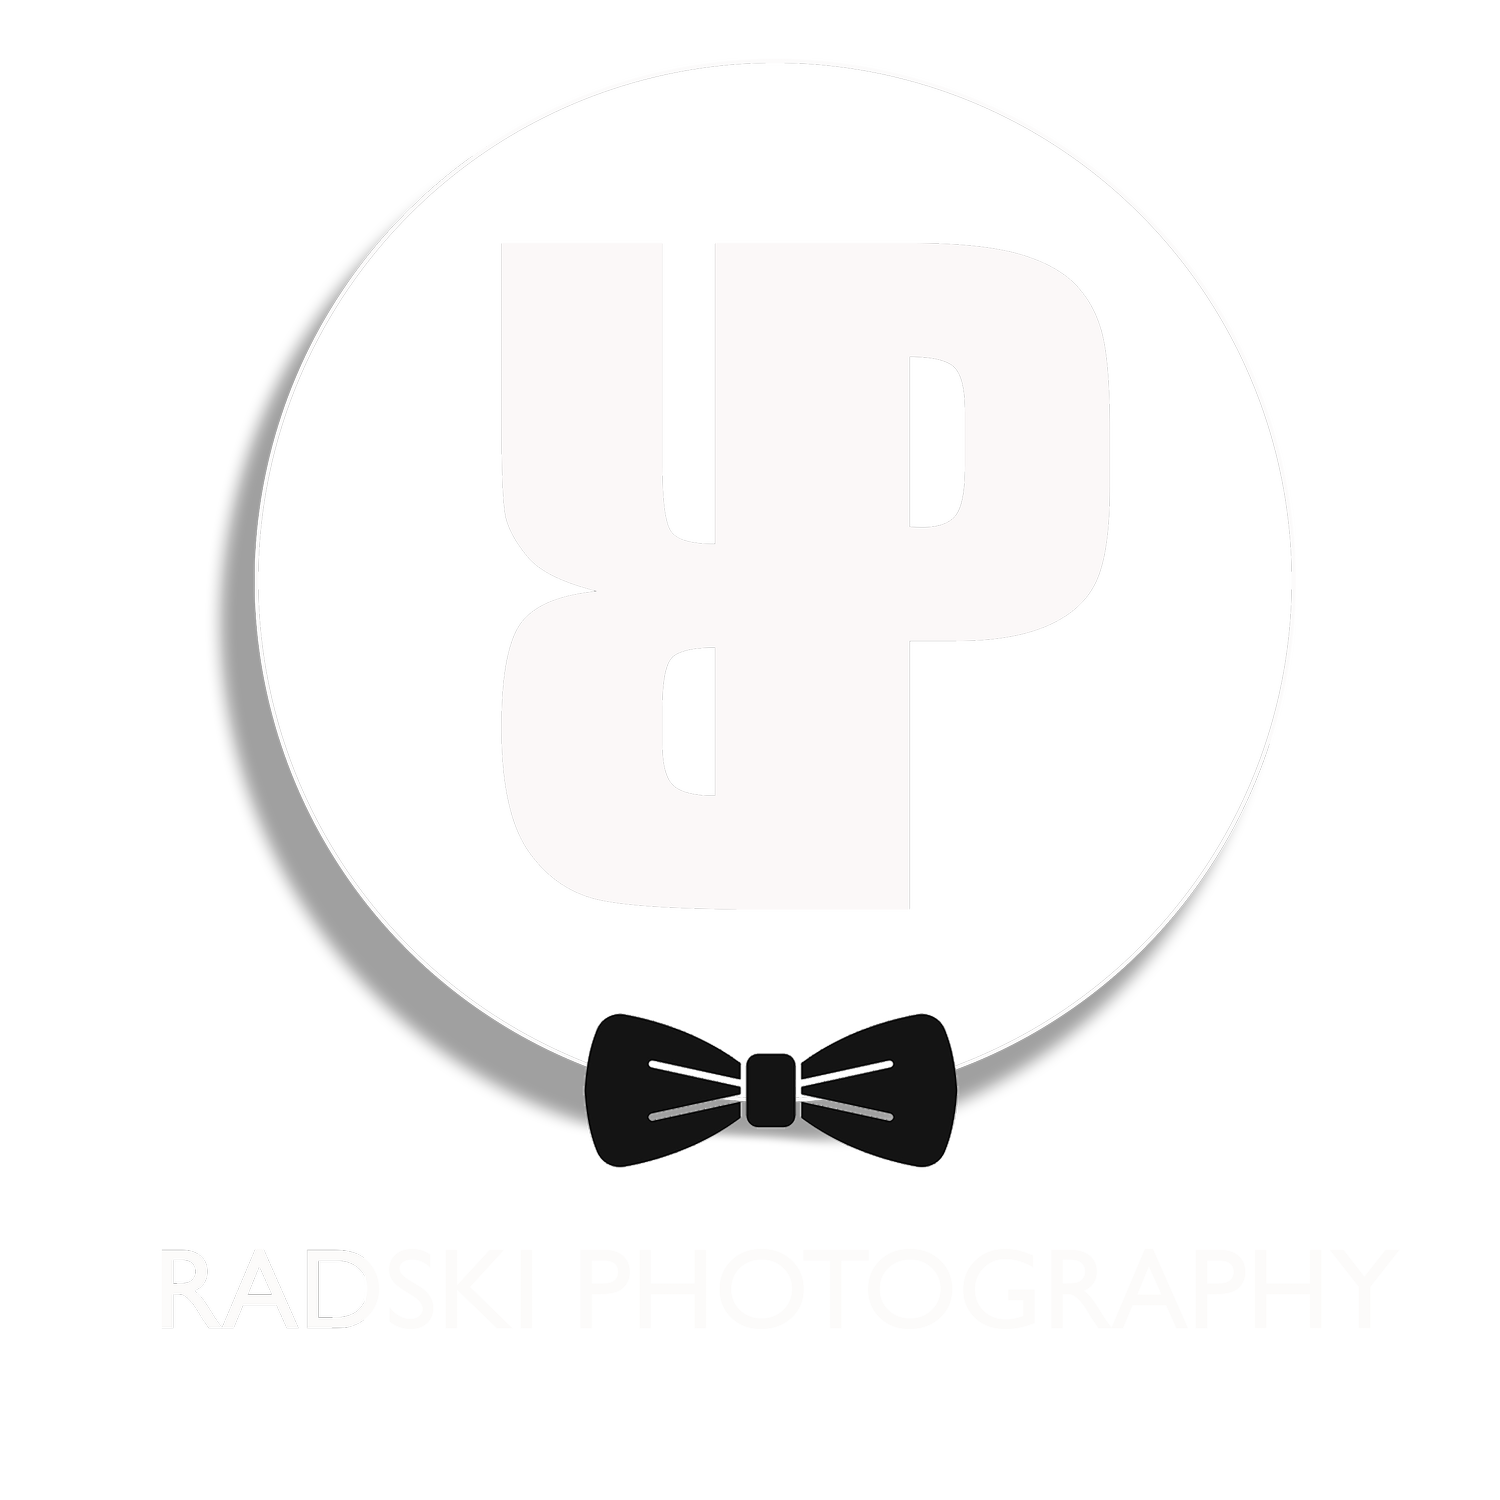 London Wedding Photographer. Radski covers London, UK and beyond.My photographic style is a mix of photo-journalism.